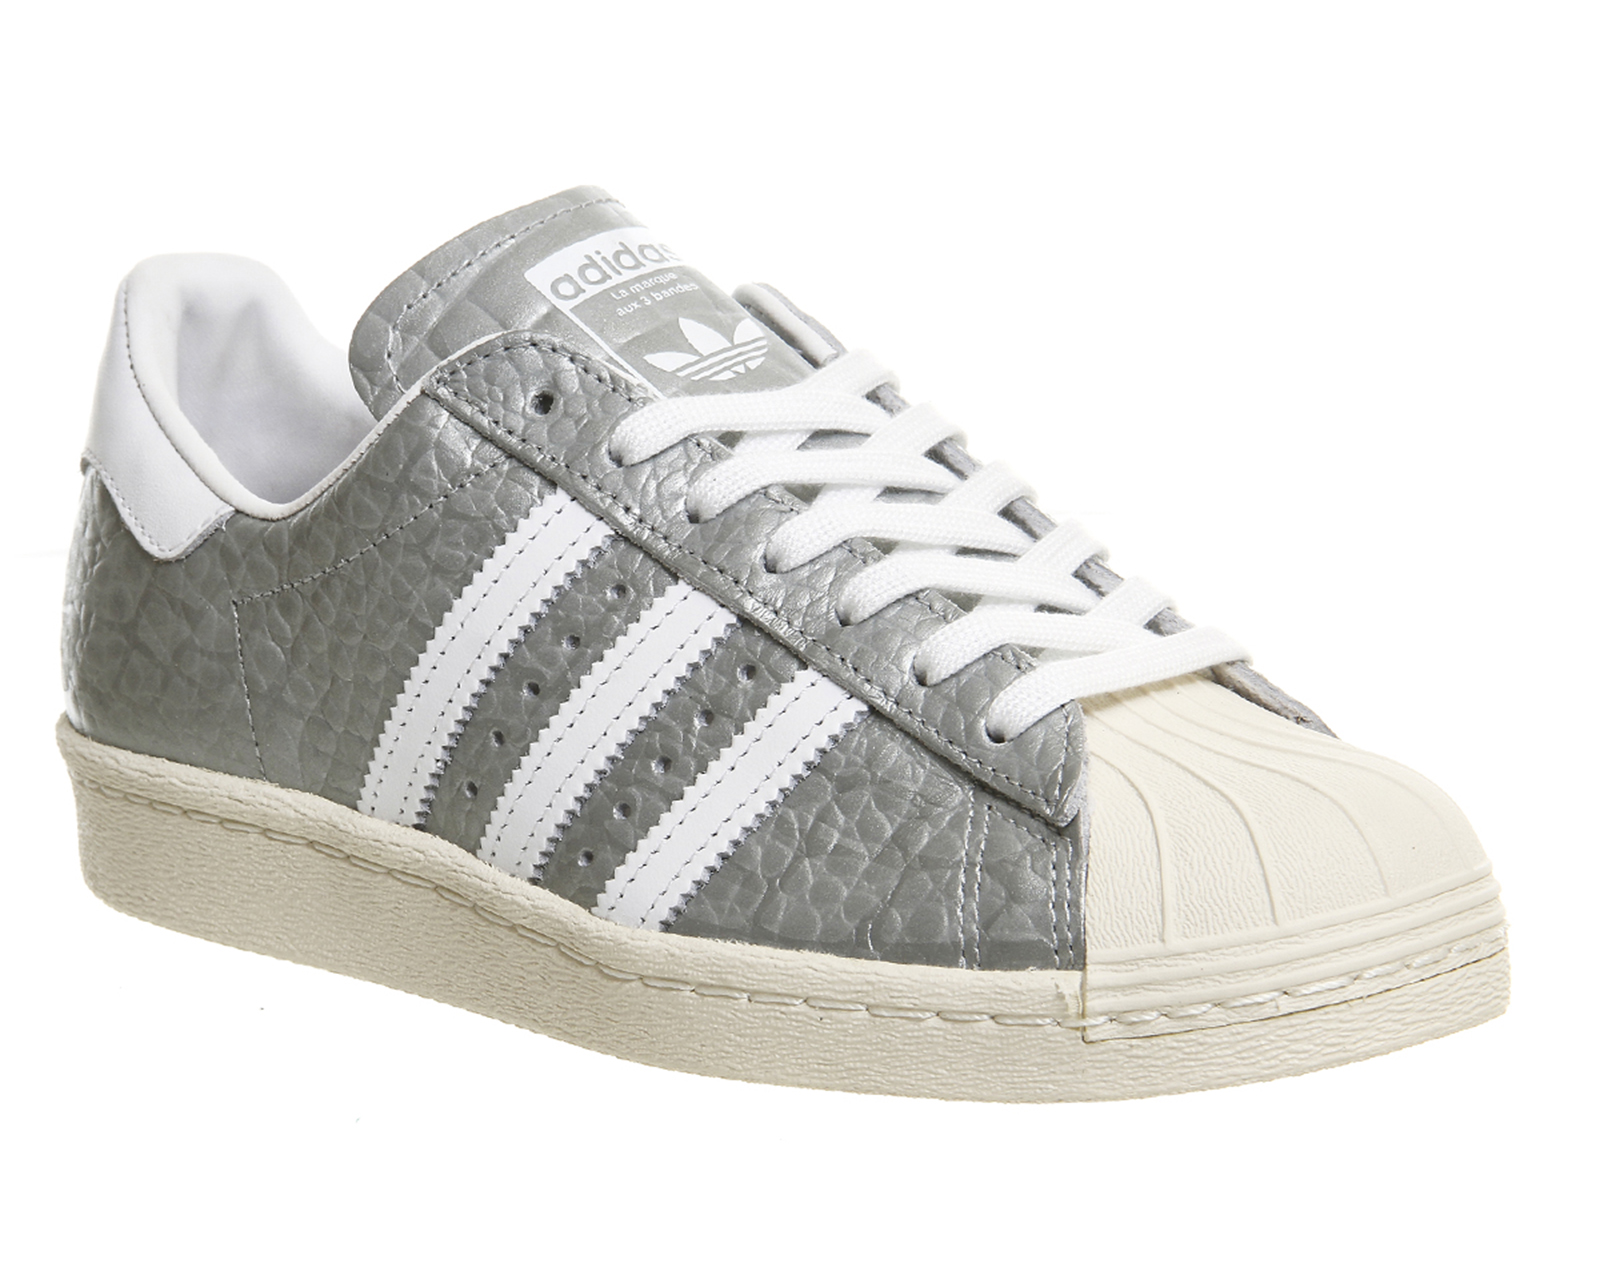 adidas Superstar 80s Metallic Silver Snake - Hers trainers